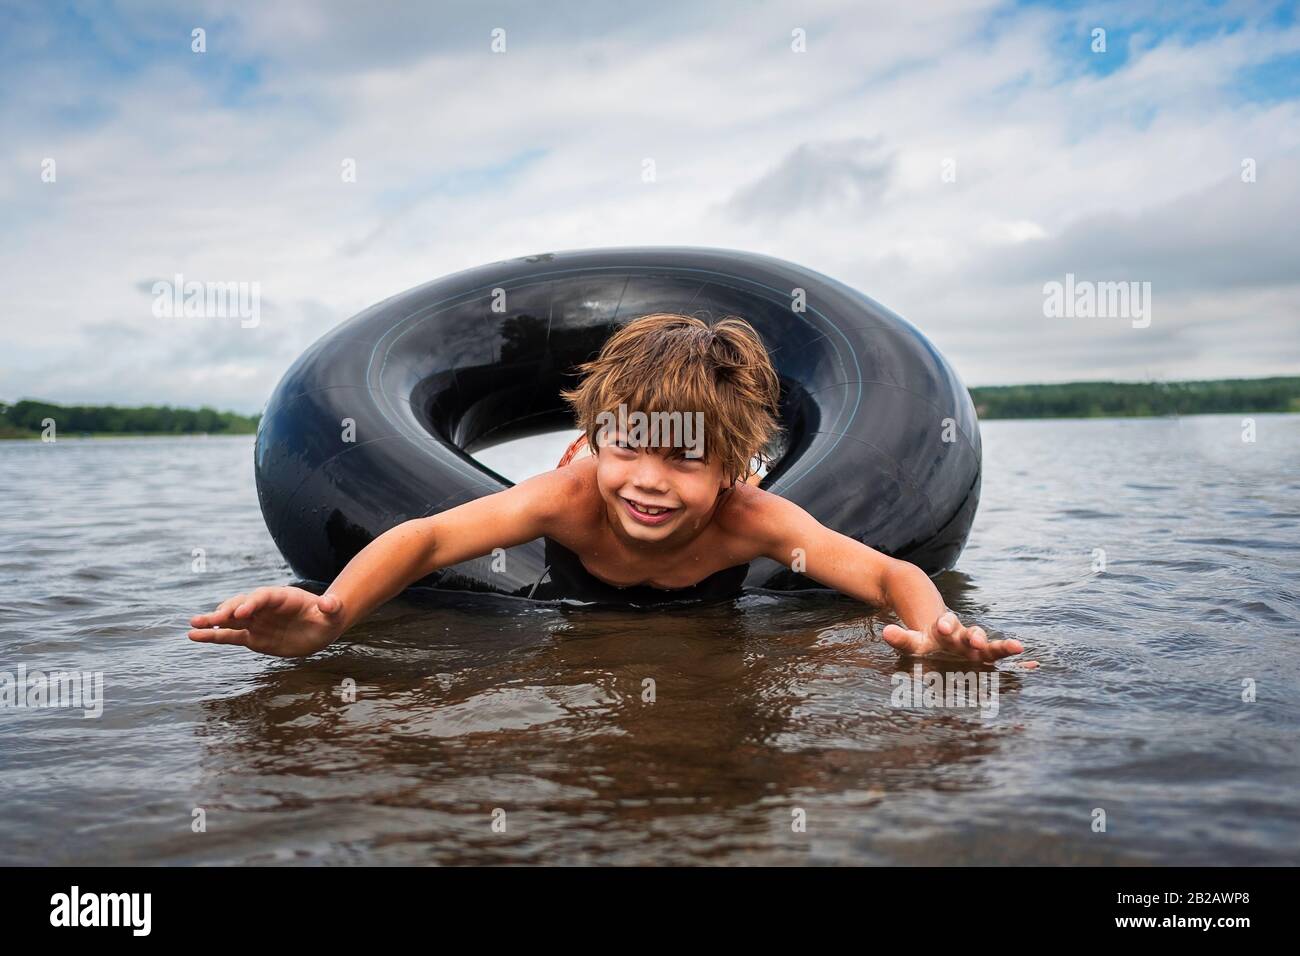 Happy boy floating in an inflatable rubber ring in a lake, USA Stock Photo